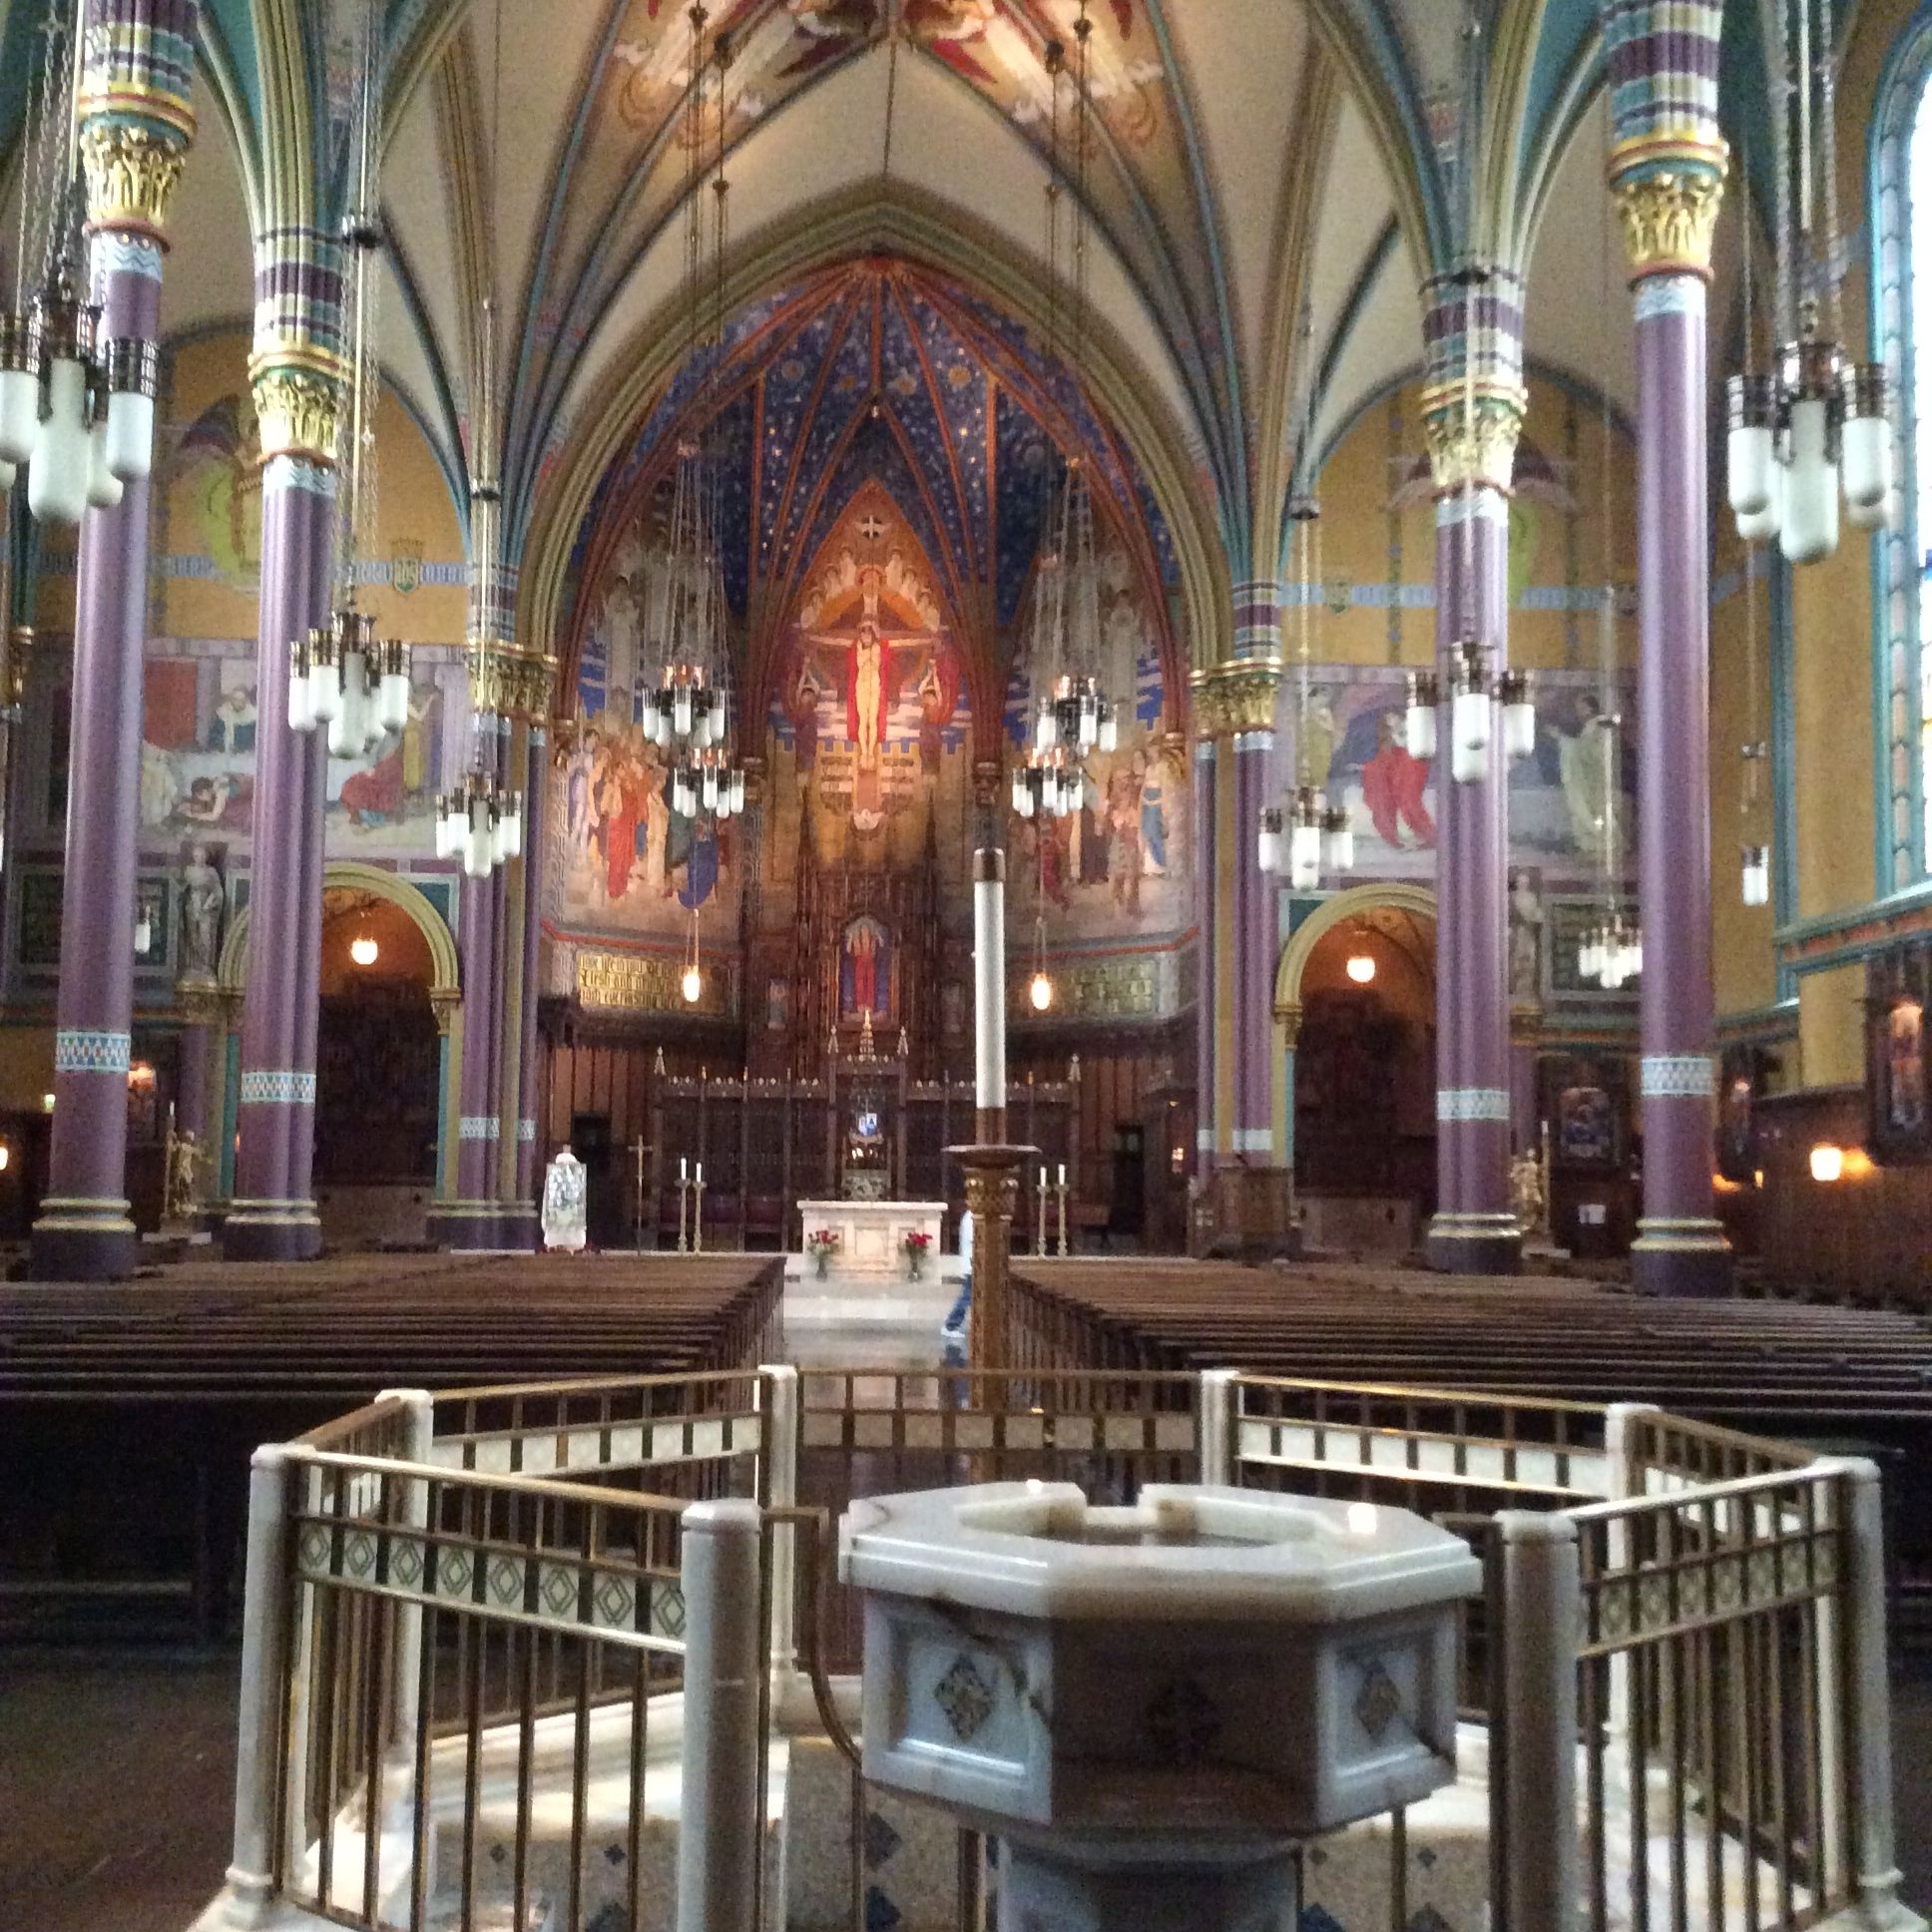 Cathedral of the Madeline in Salt Lake City, Ut.